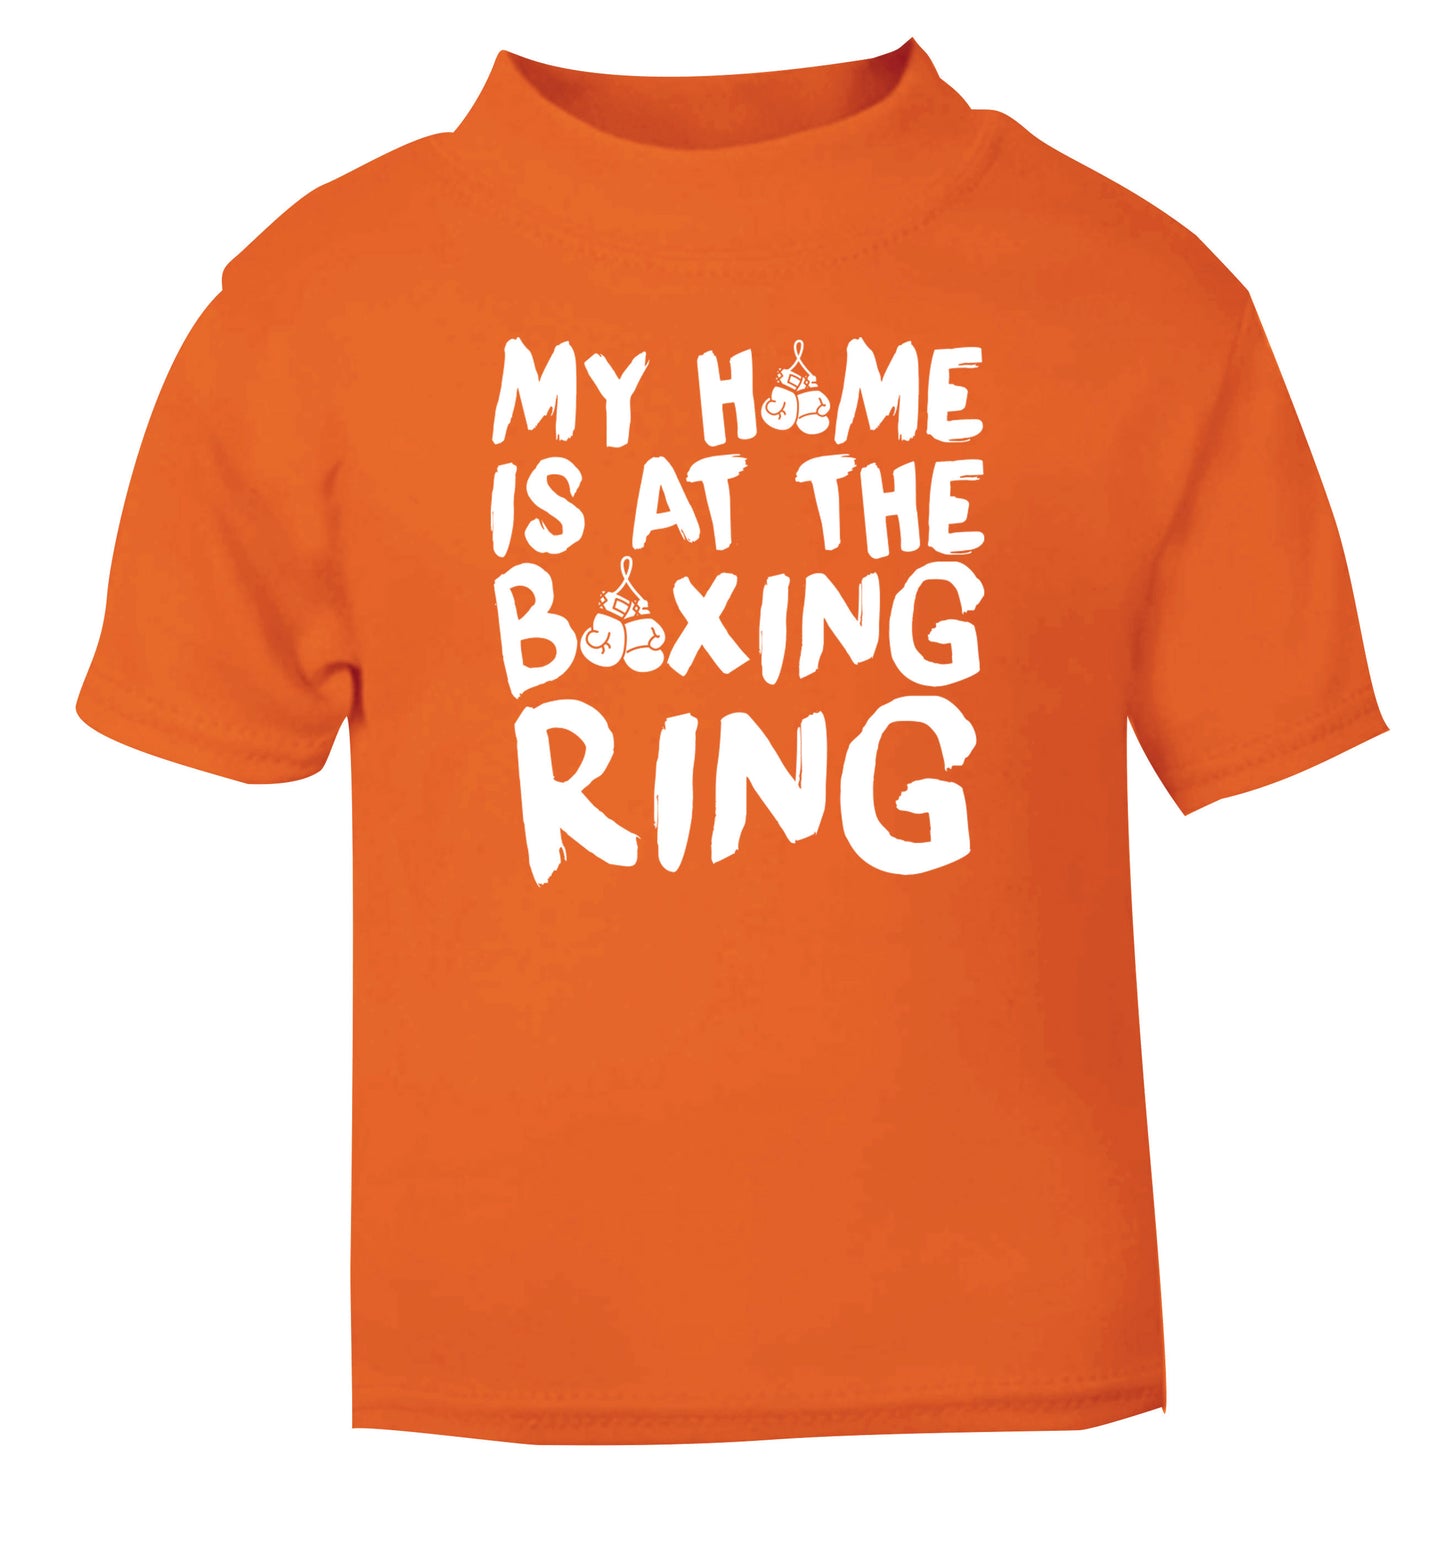 My home is at the boxing ring orange Baby Toddler Tshirt 2 Years